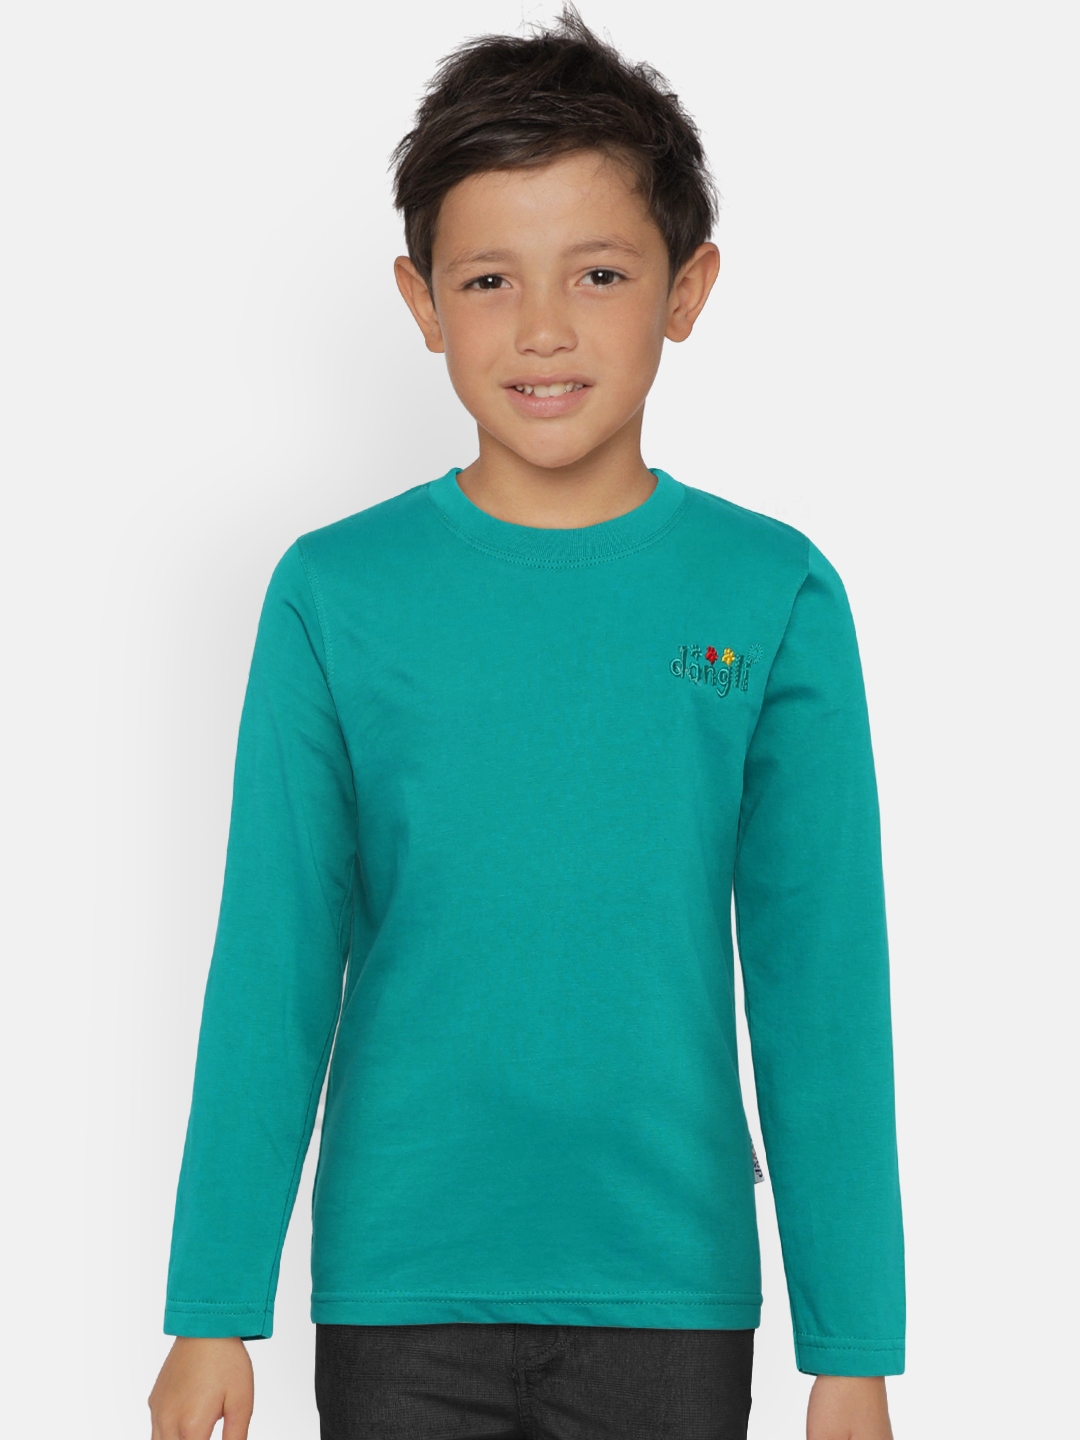 Buy Dongli Boys Teal Blue Solid Round Neck T Shirt - Tshirts for Boys ...